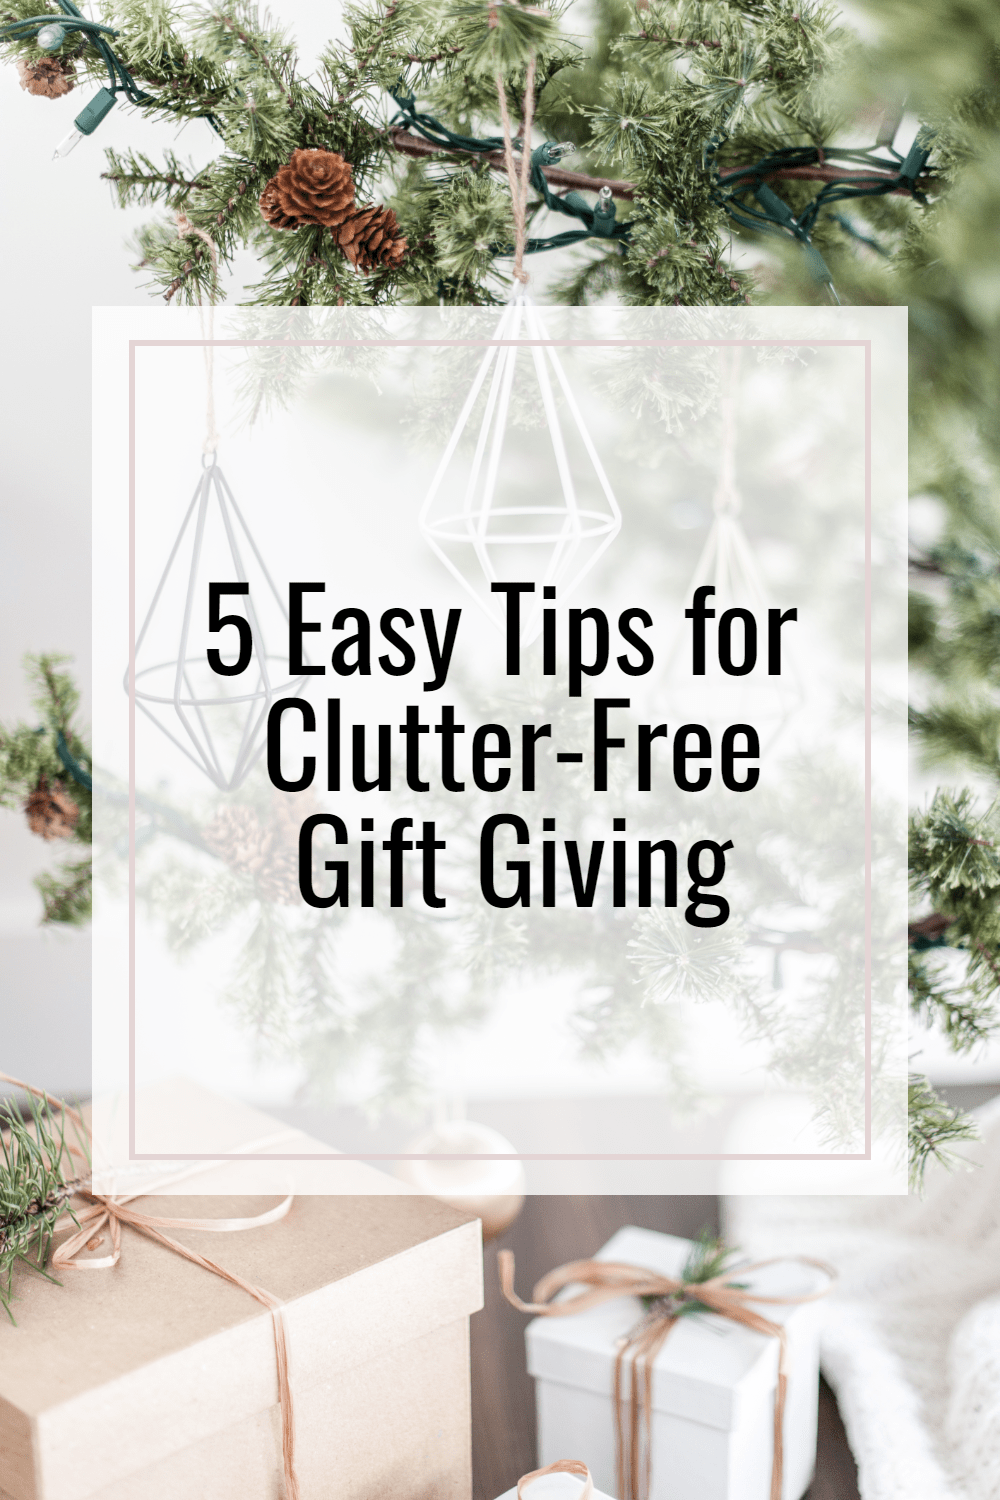 5 Easy Tips for Clutter-Free Gift Giving | tree with brown & white packages tied with twine